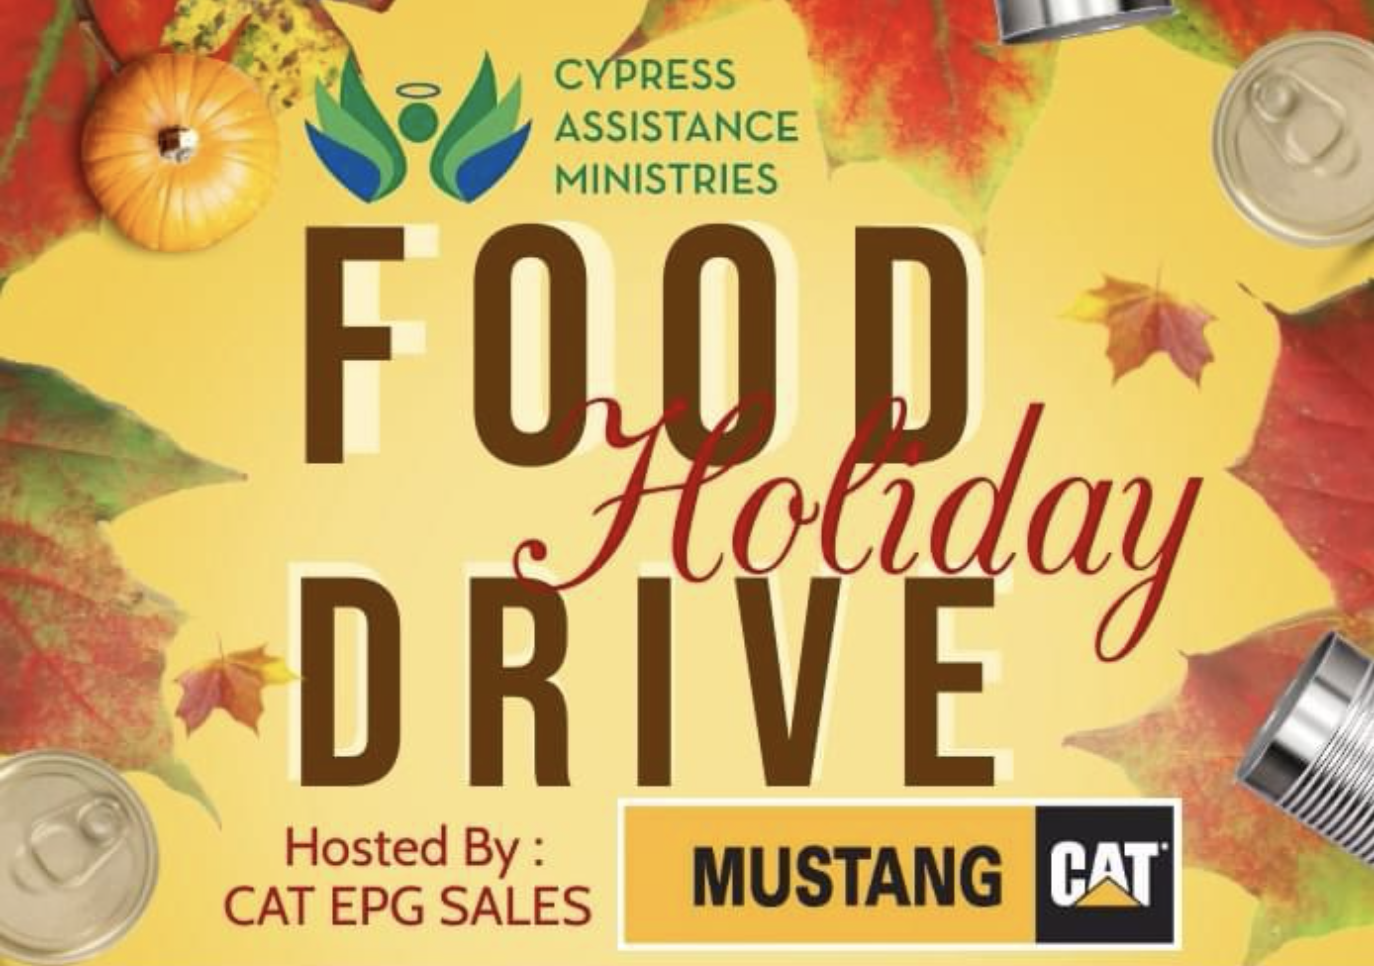 Get in the Spirit of Giving with Cypress Assistance Ministries